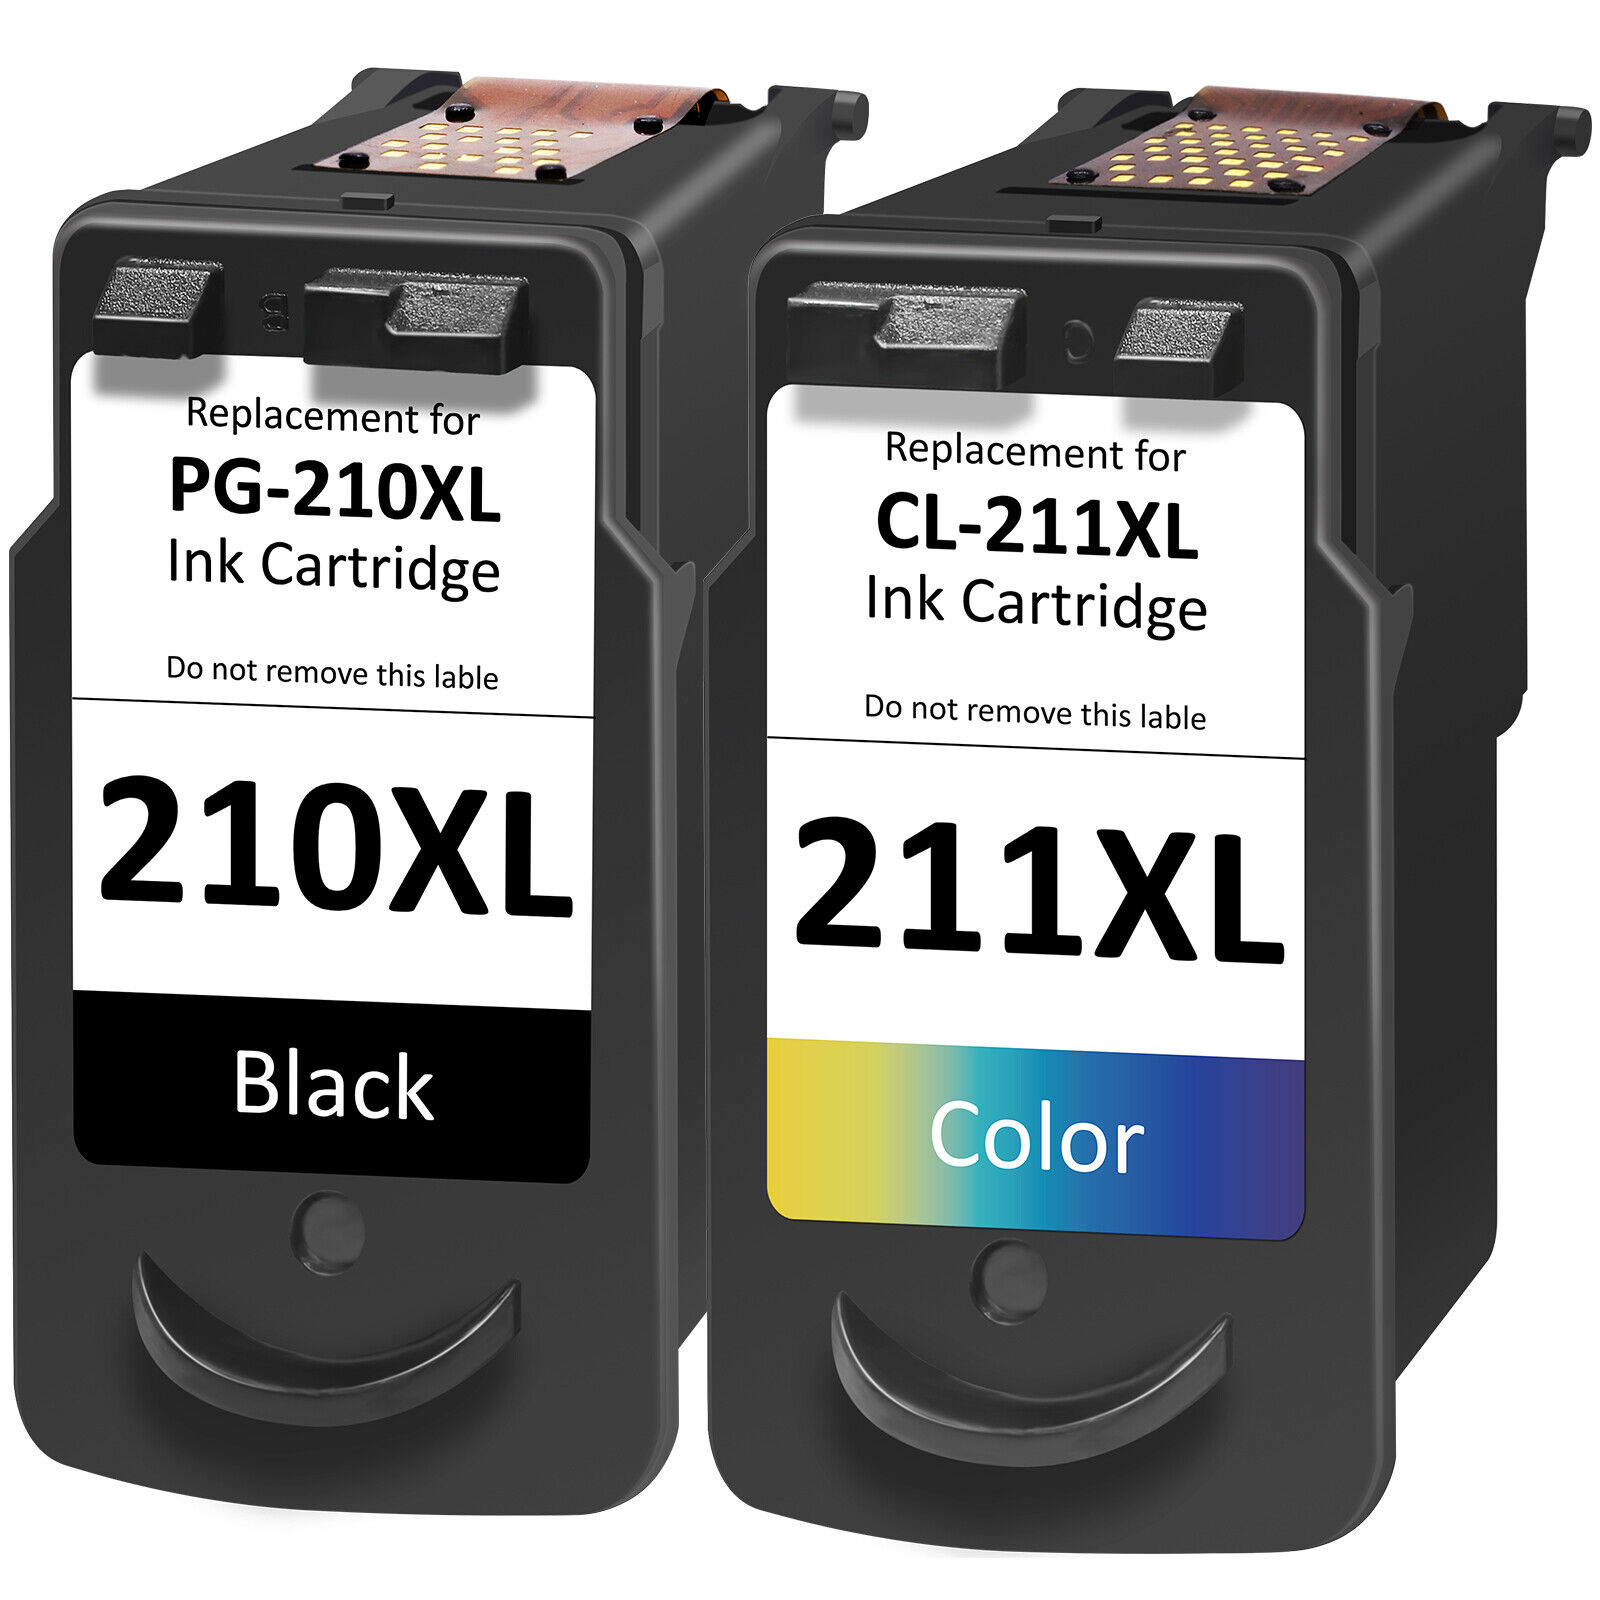 PG-210XL CL-210XL Ink Cartridge for Canon PIXMA iP2700 MP240 MP250 MP499 Printer